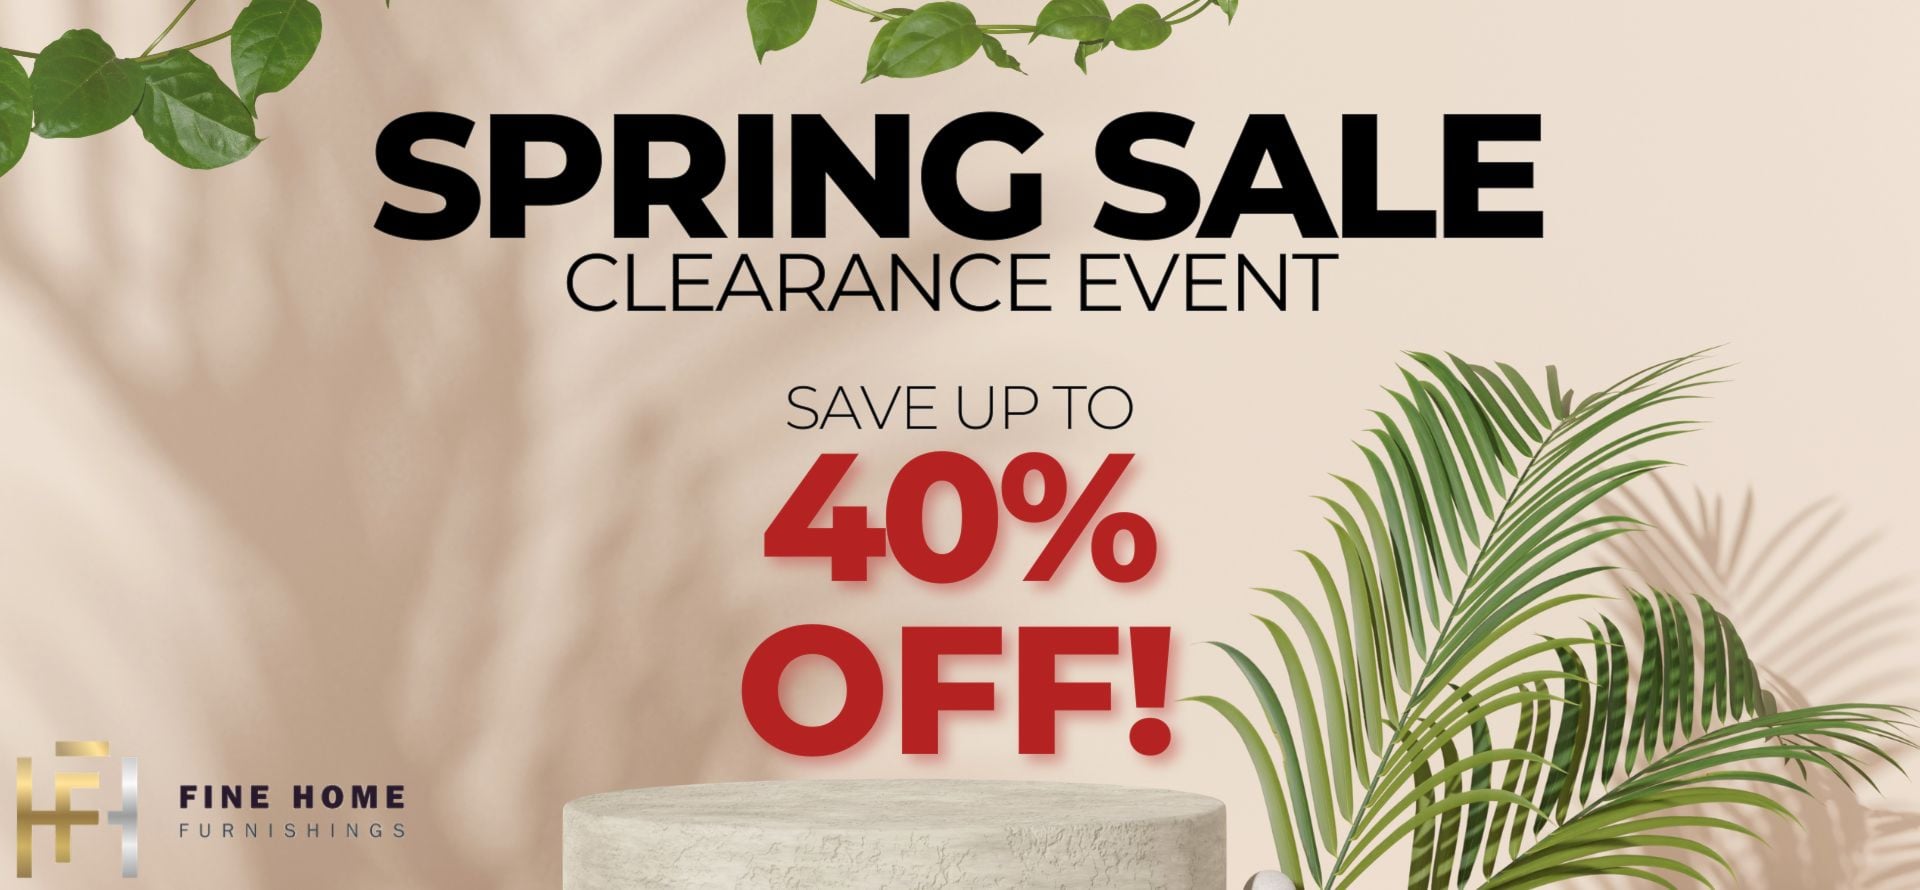 Spring Sale Clearance Event Save up to 40% Off